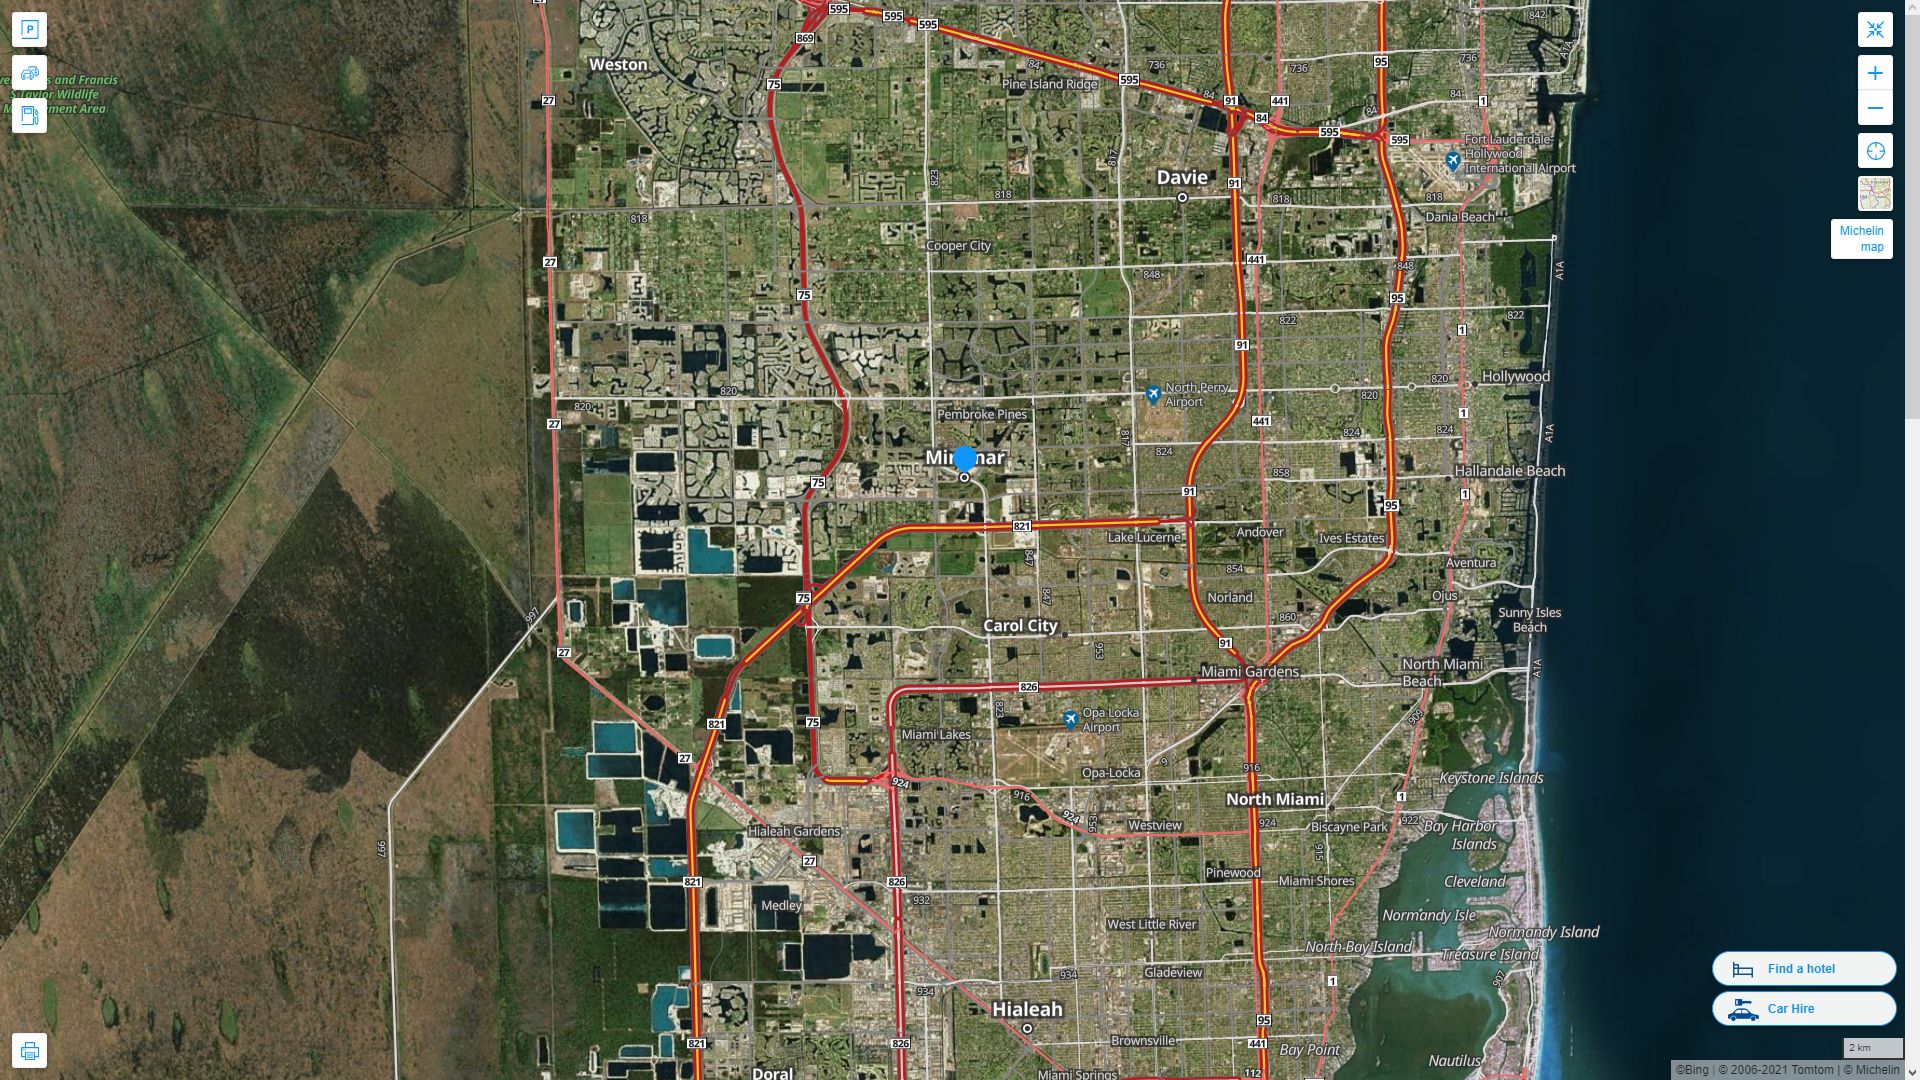 Miramar Florida Highway and Road Map with Satellite View